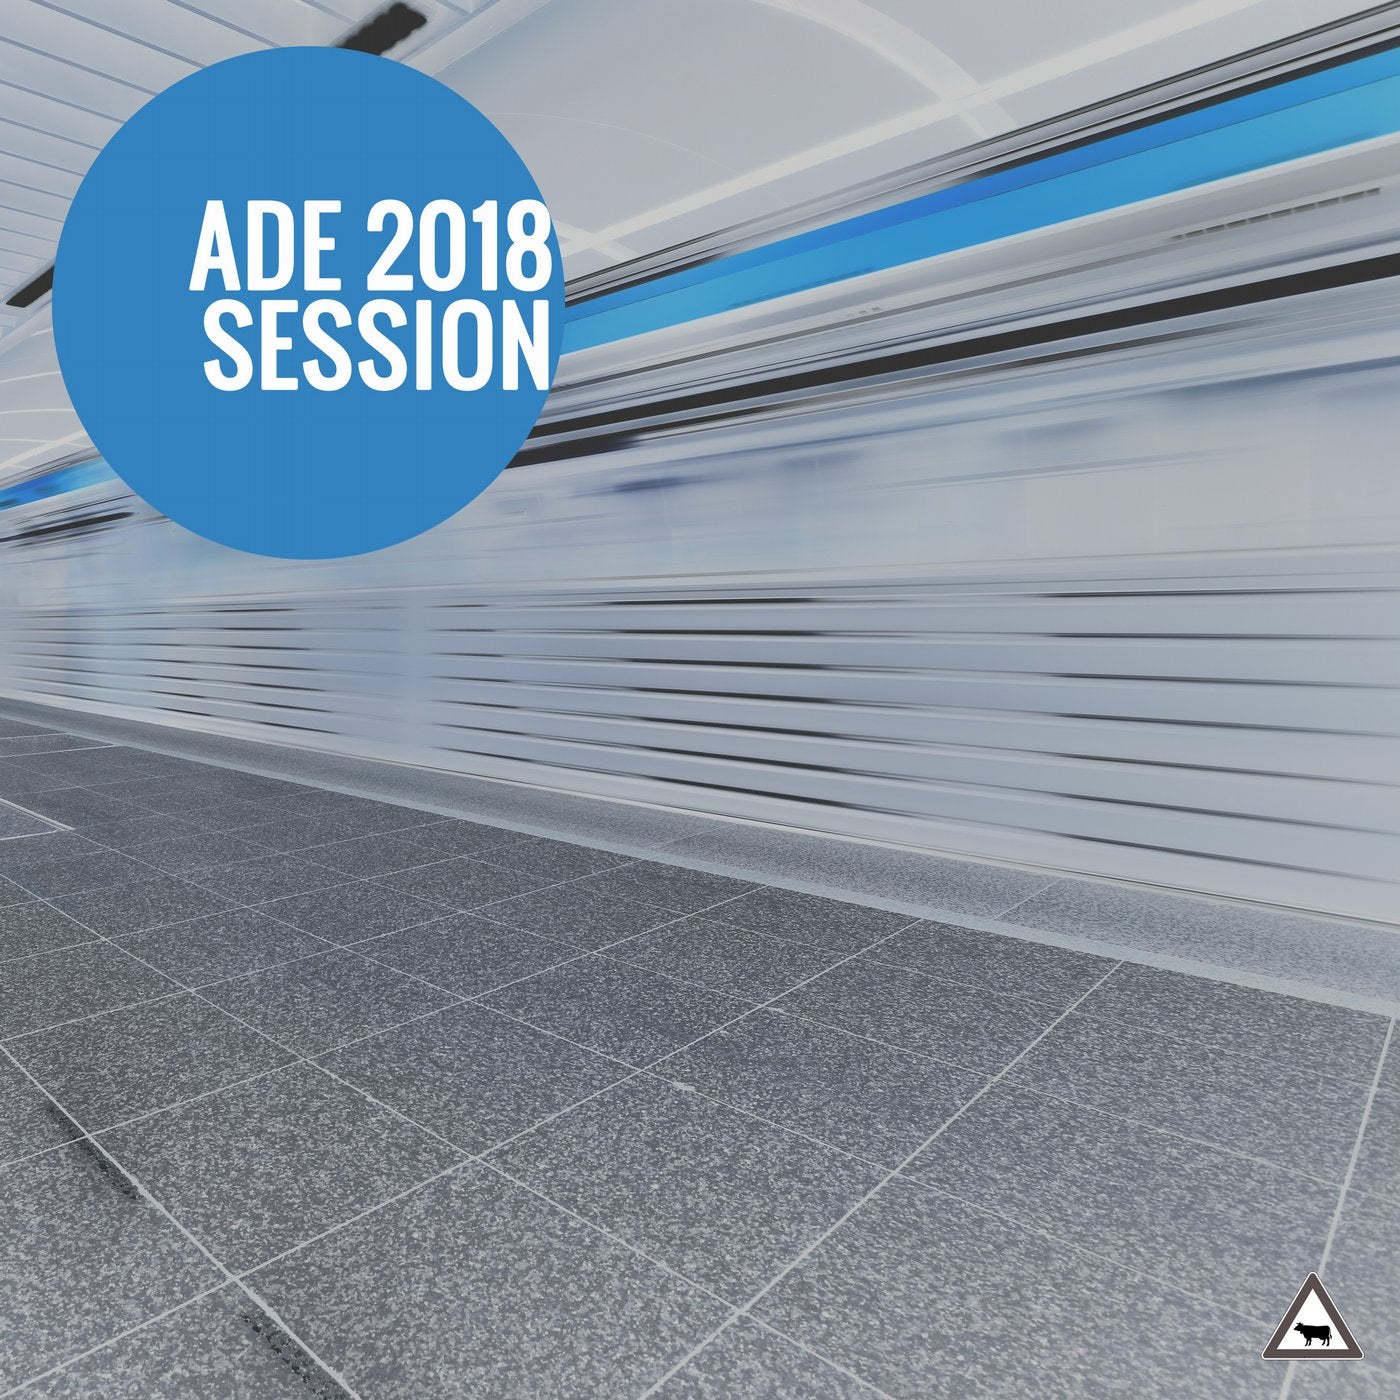 ADE 2018 Session